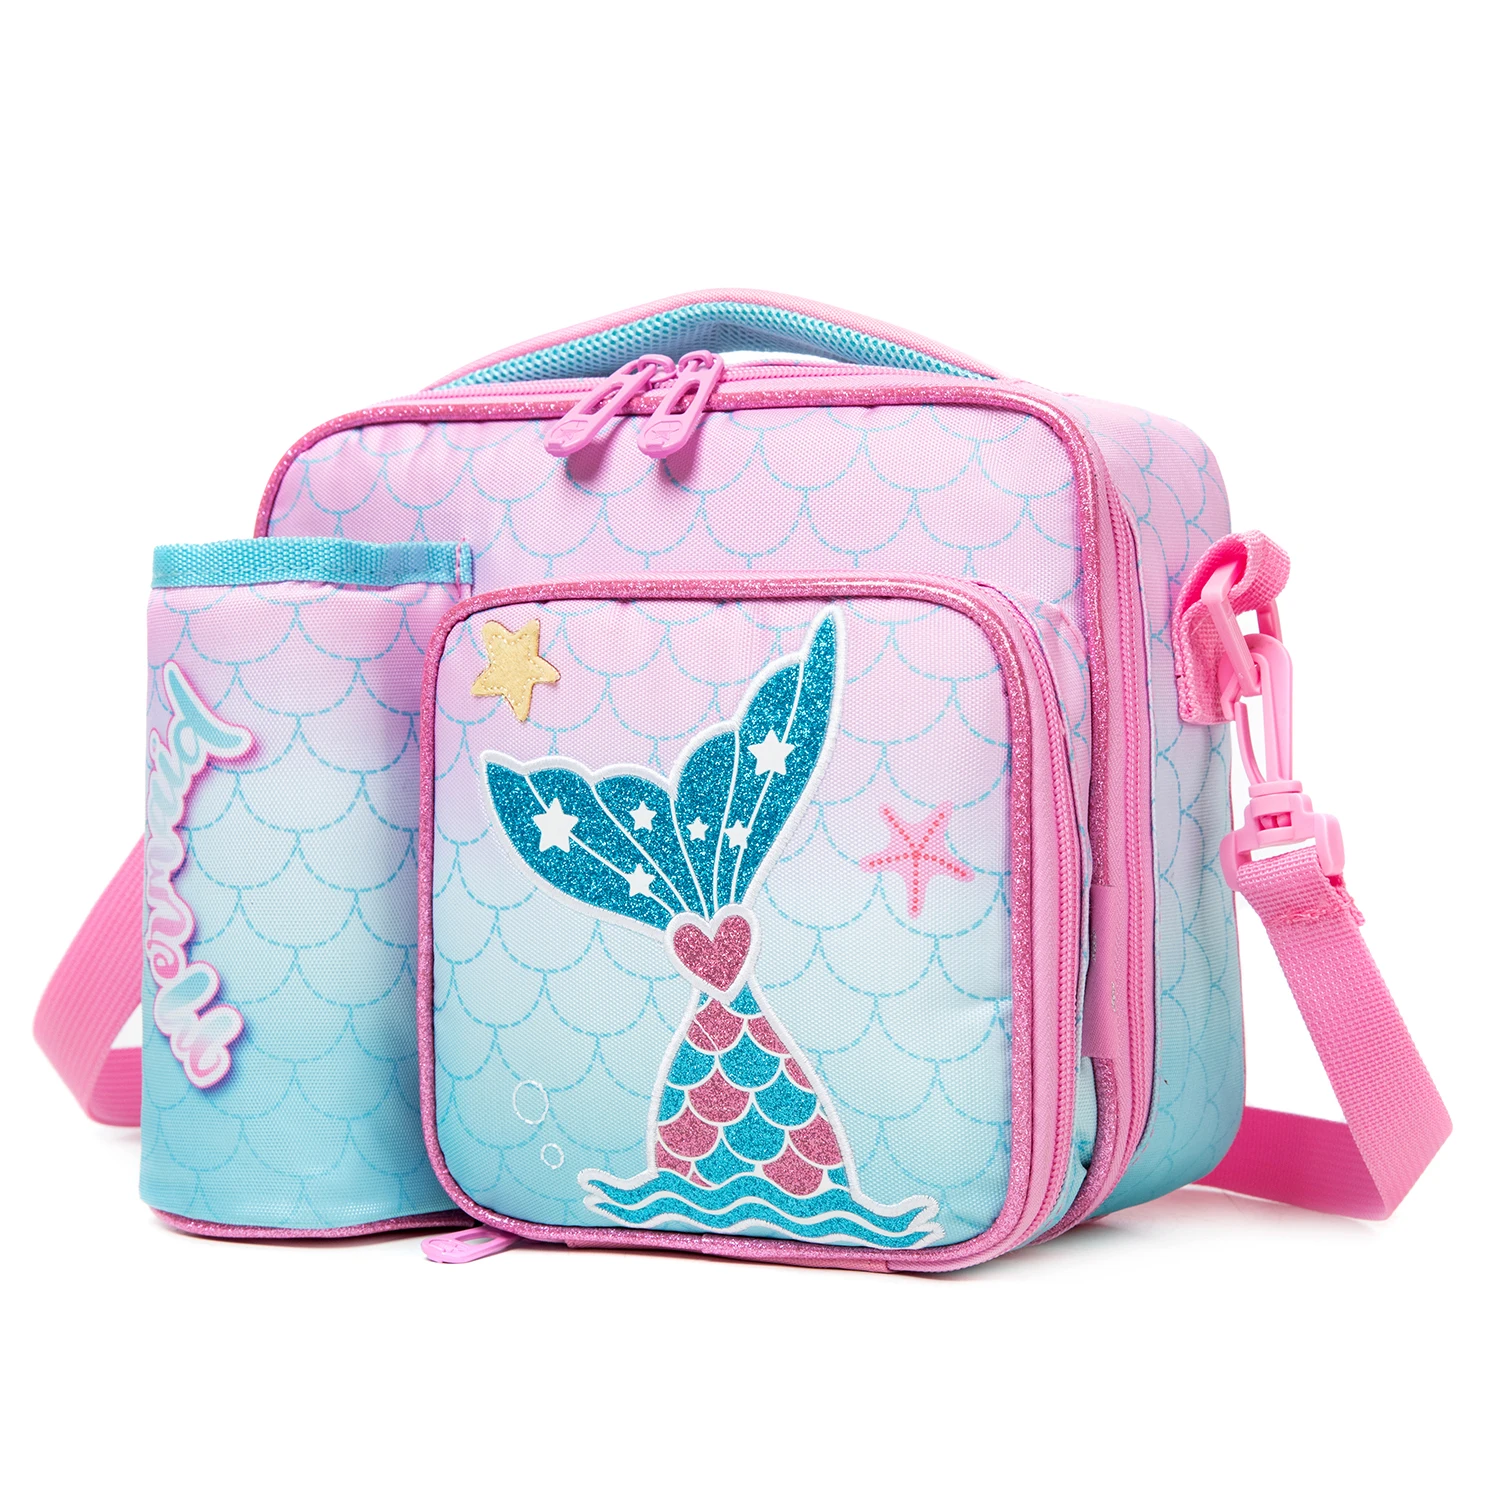 

Girls Lunch Bag Mermaids and Alpacas Cute Polyester Lunch Bag for Picnic Outing School Best Gift for Girls